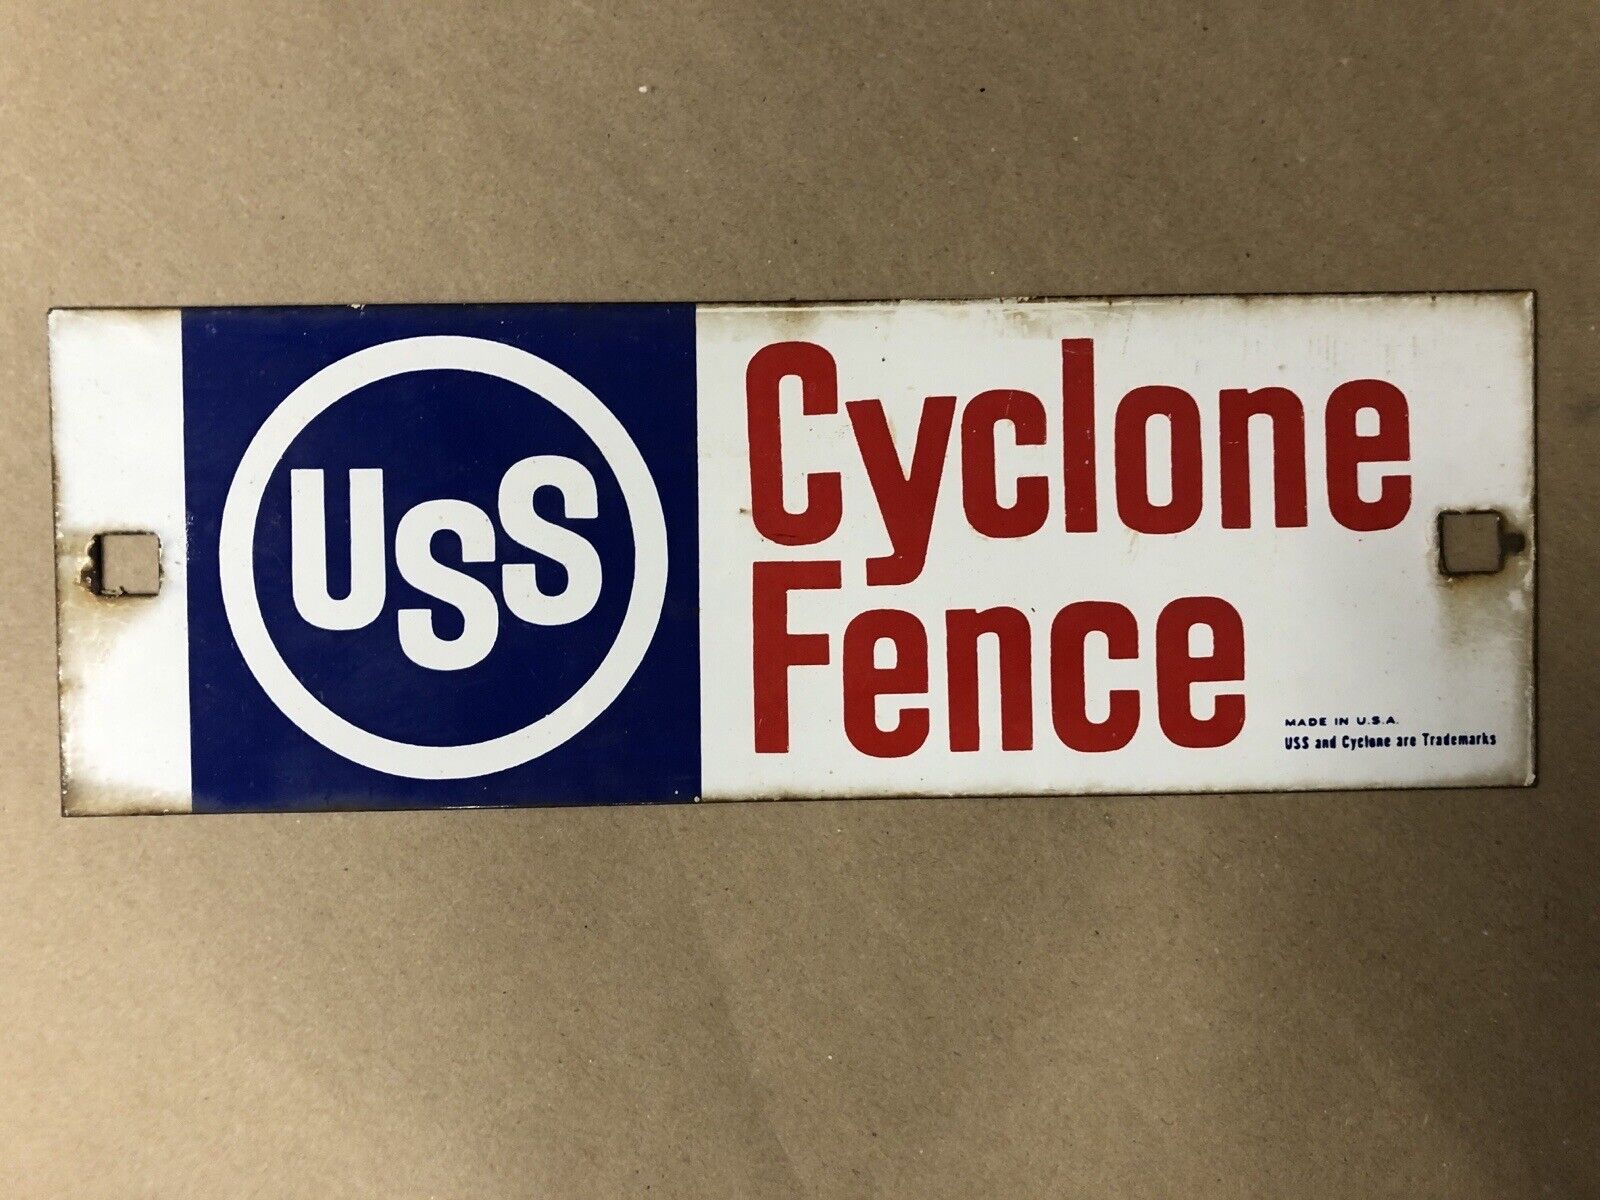  Vintage USS Cyclone Fence Co Porcelain Fence Sign Steel 13 1/2\